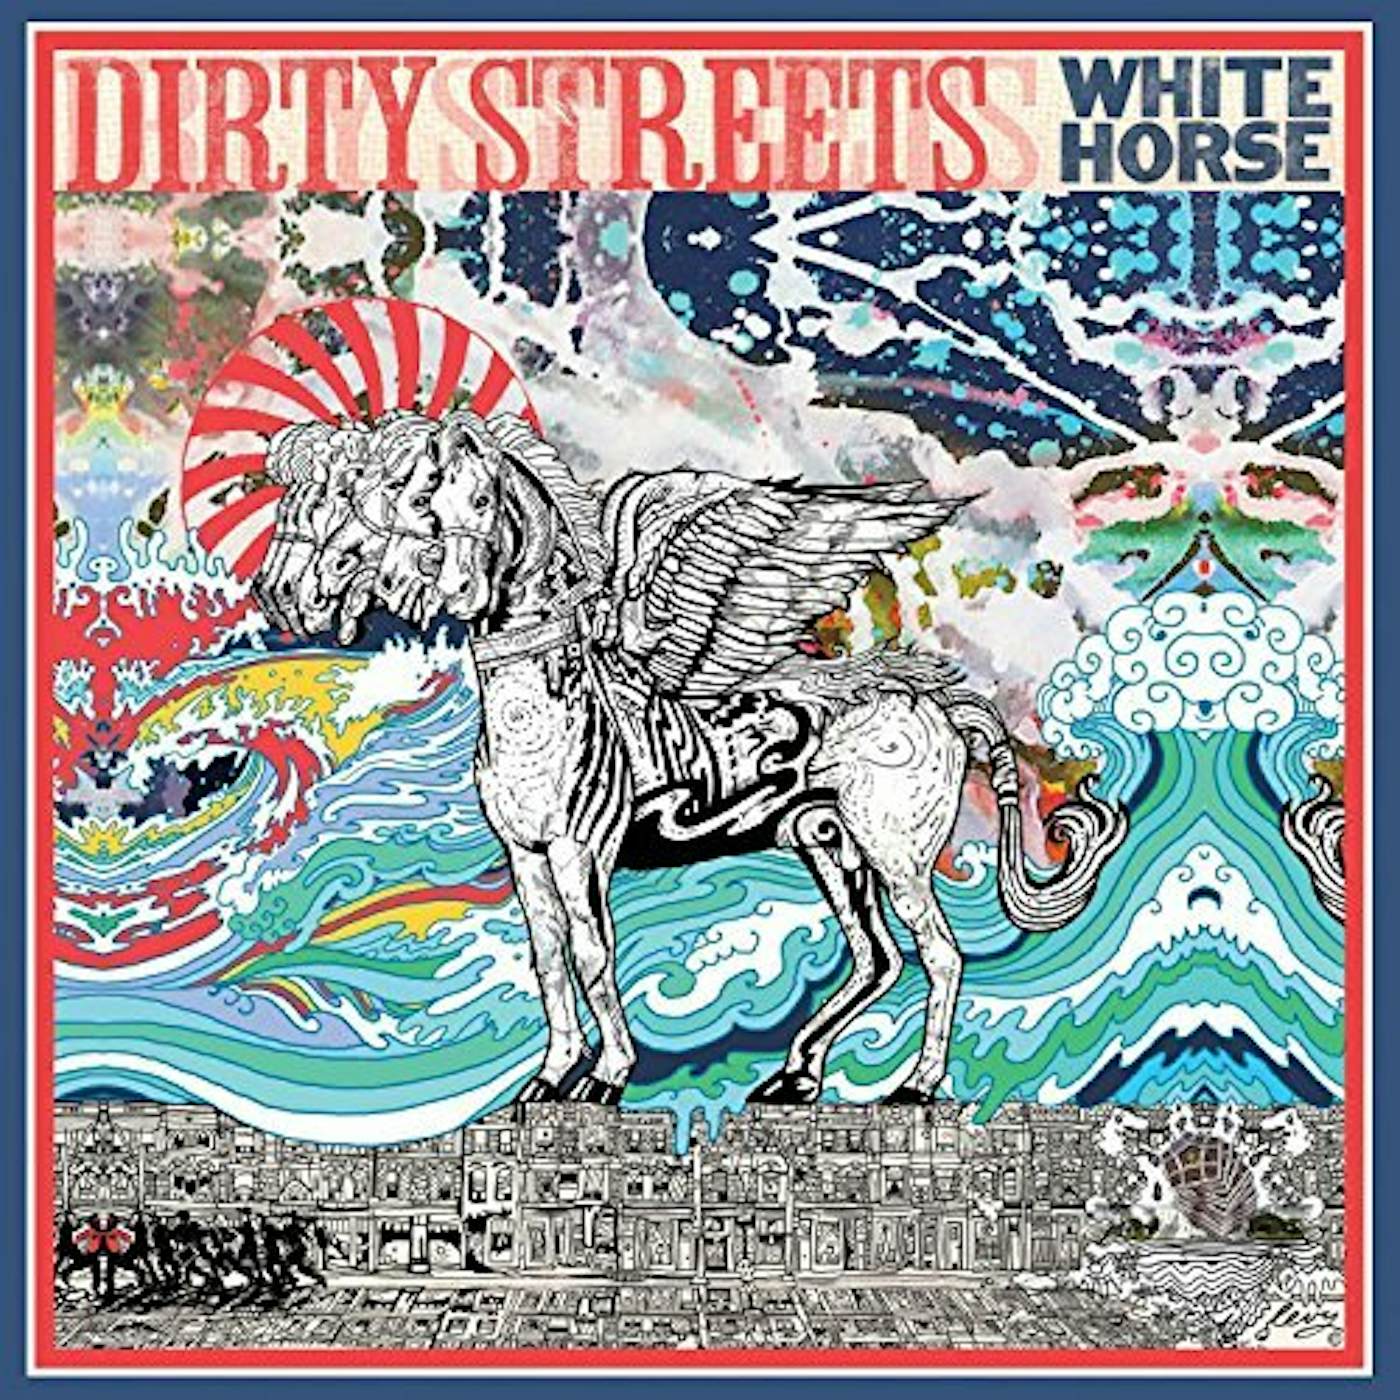 Dirty Streets White Horse Vinyl Record